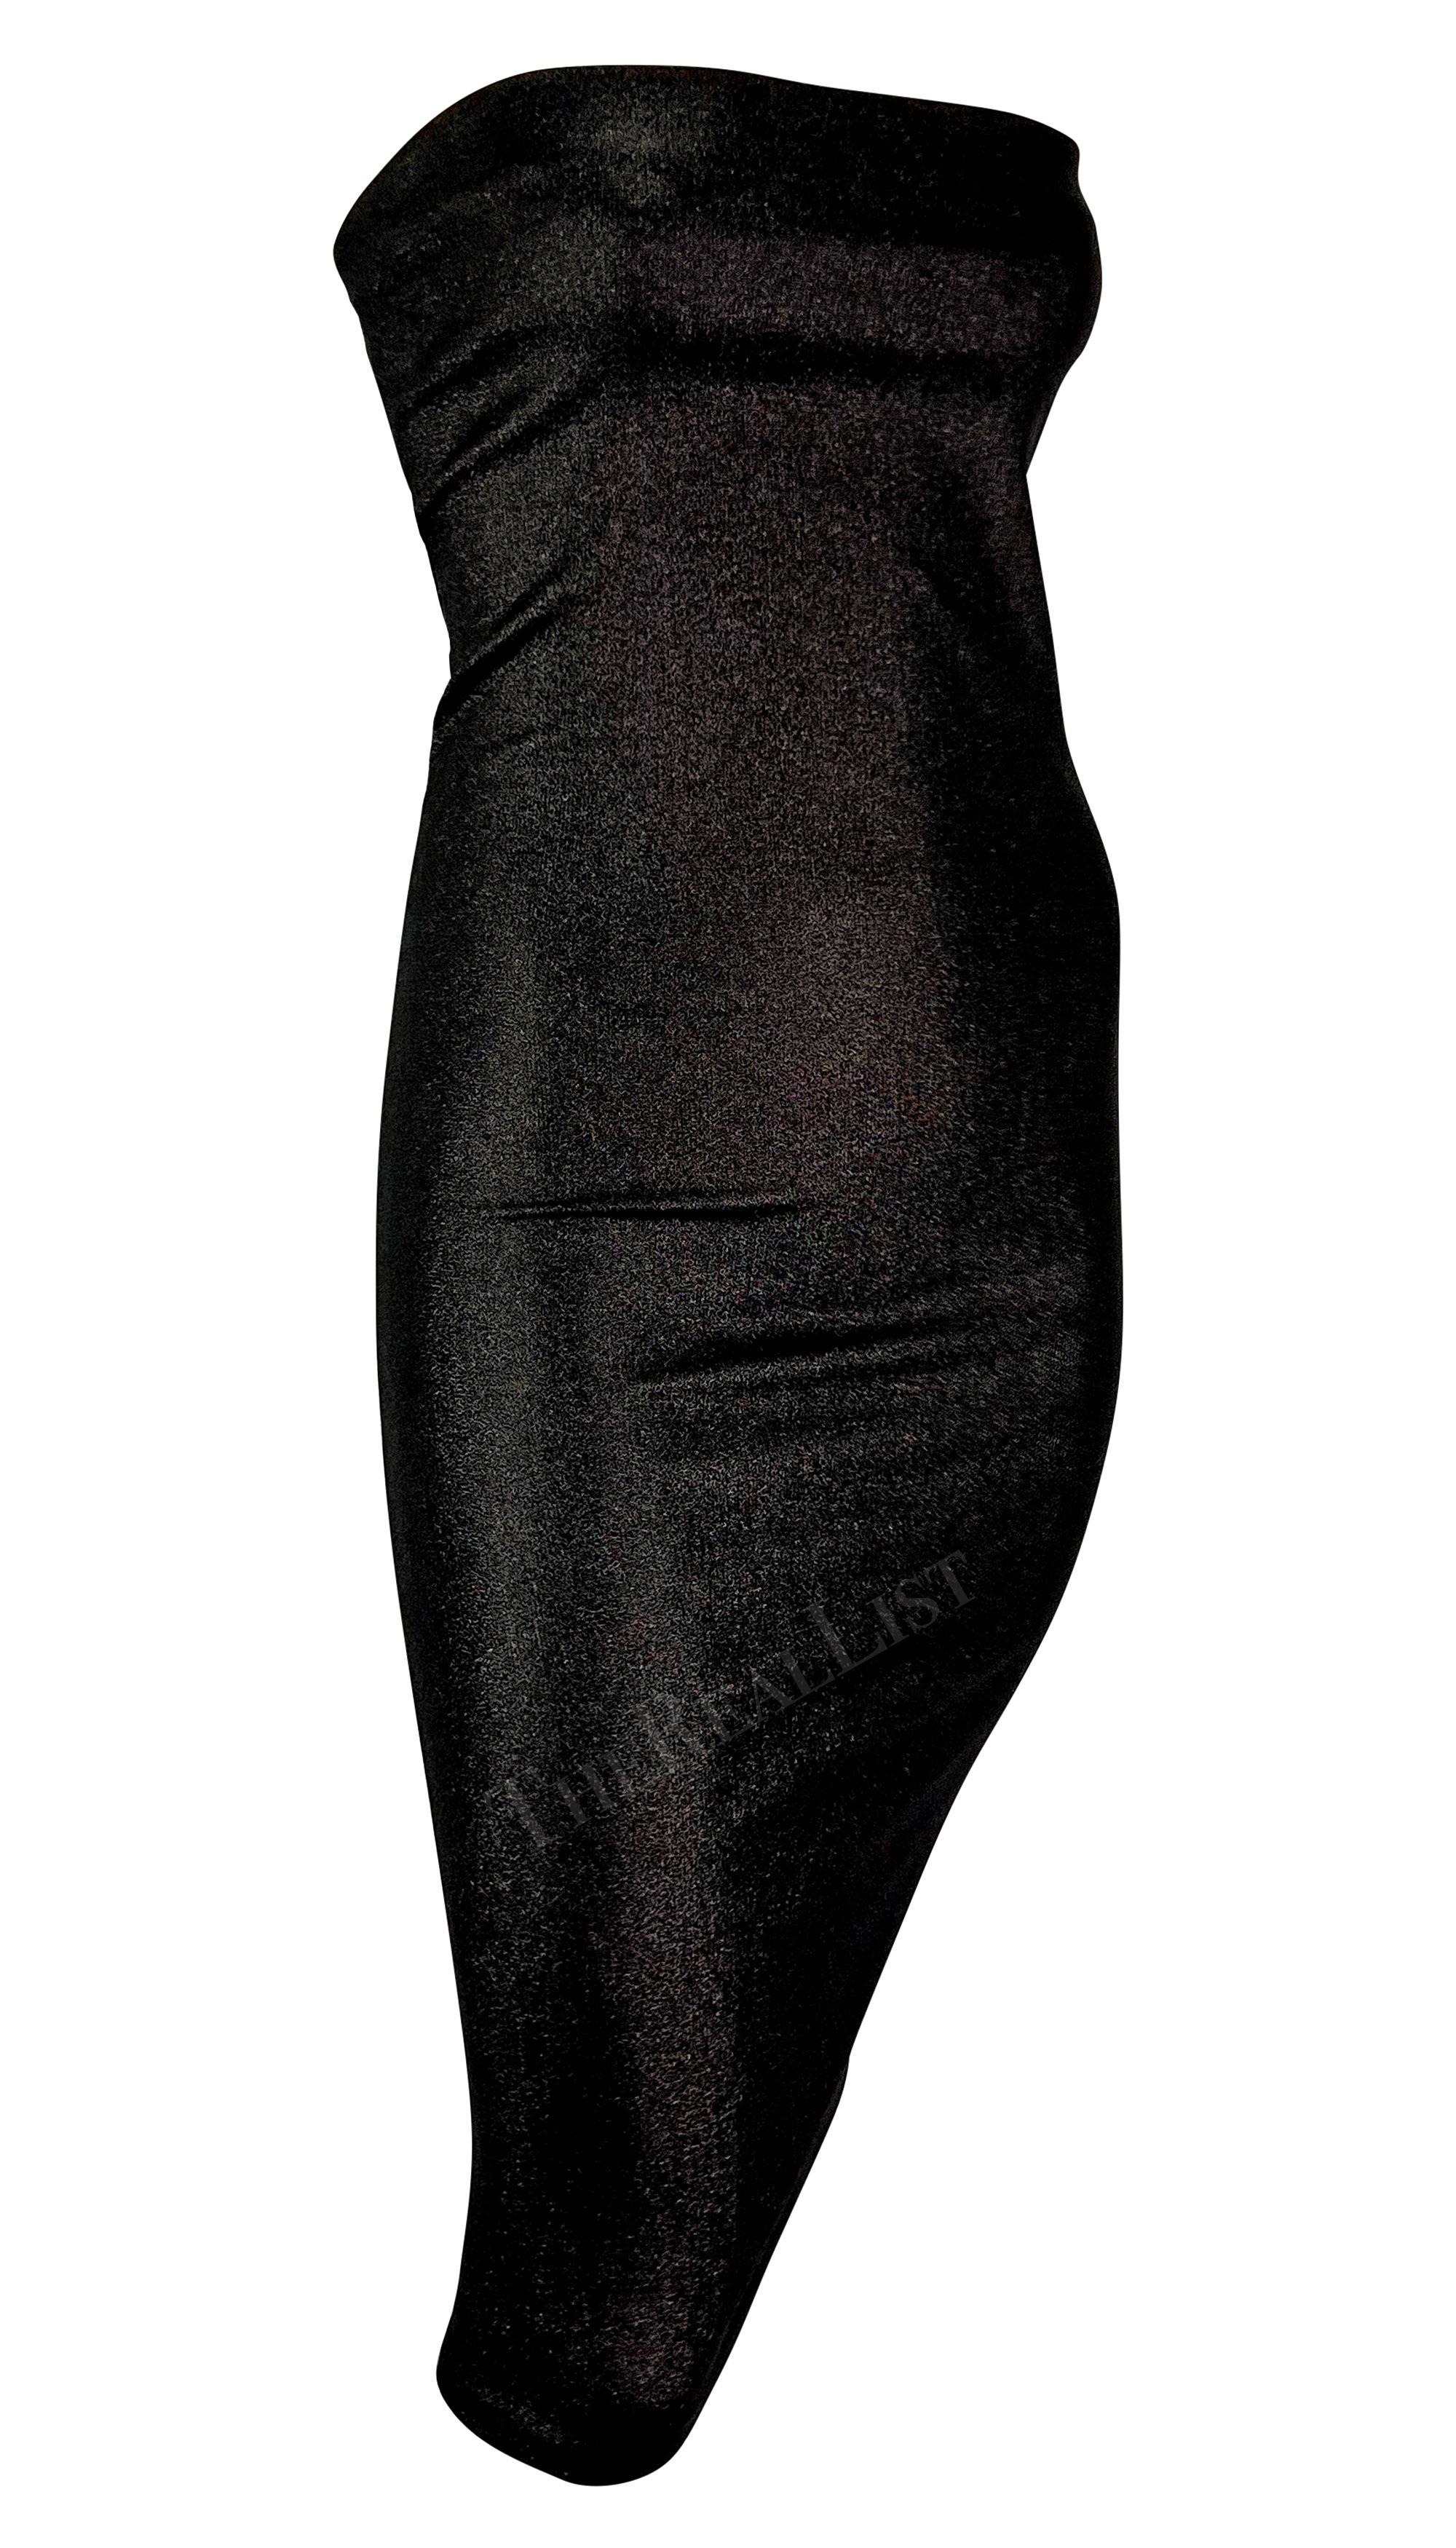 S/S 1997 Gucci by Tom Ford Brown Lurex Metallic Stretch Strapless Tube Dress For Sale 5